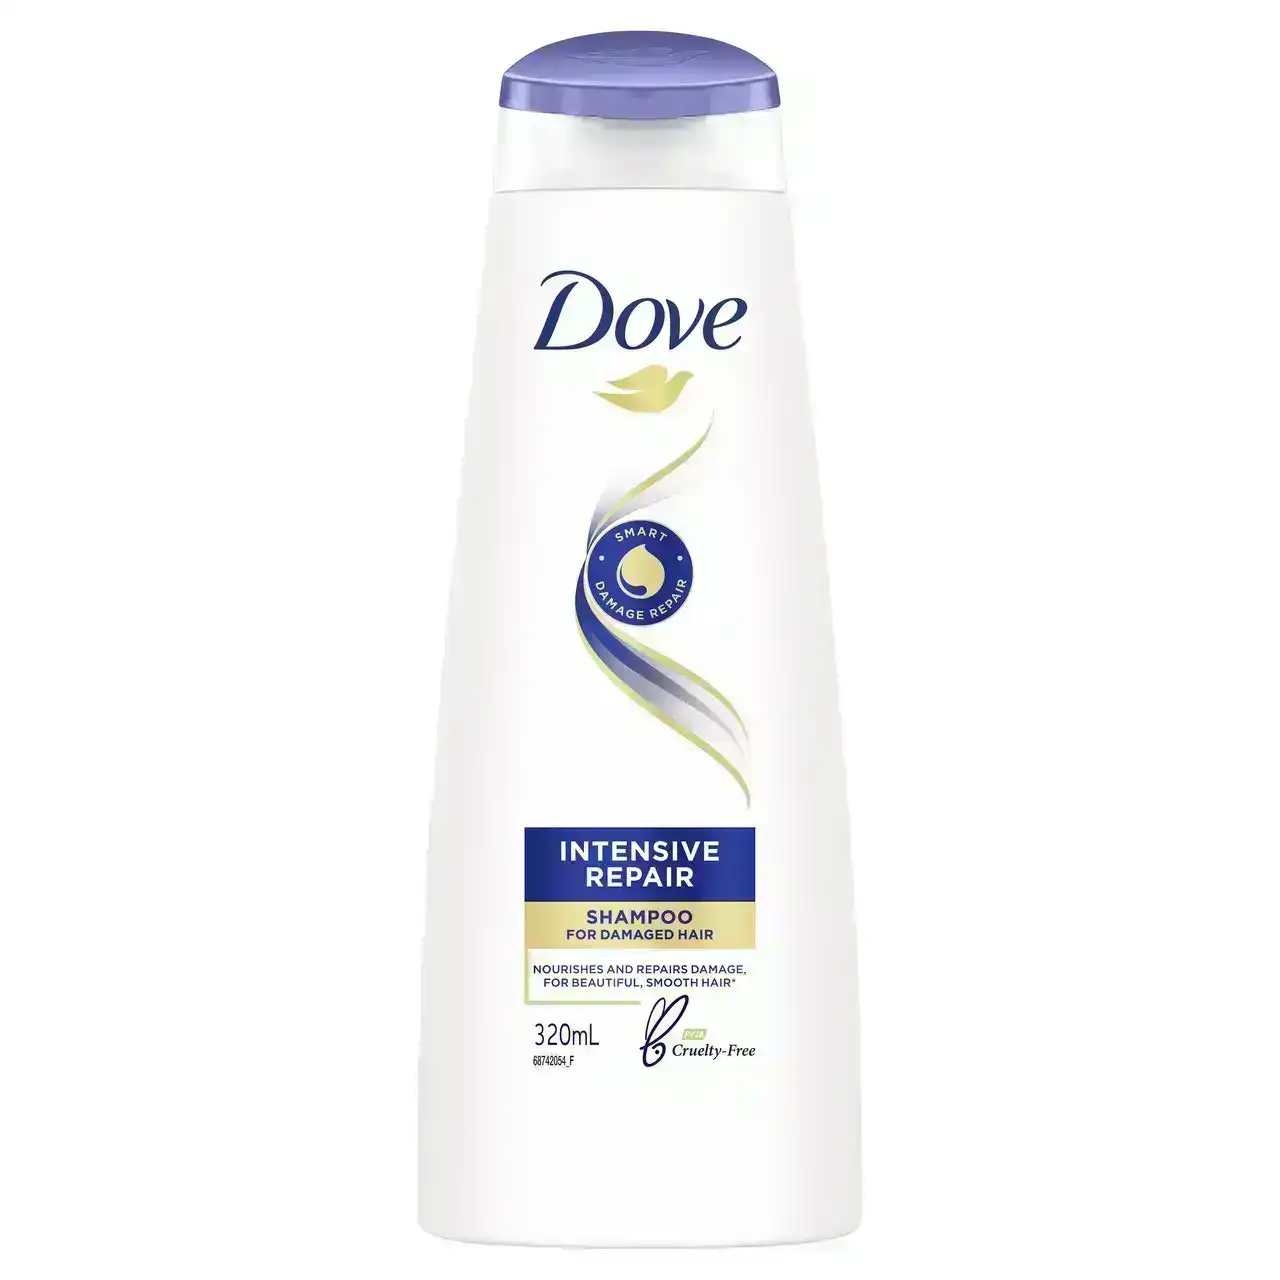 Dove Intensive Repair Shampoo for Damaged Hair with Smart Target Technology  320ml